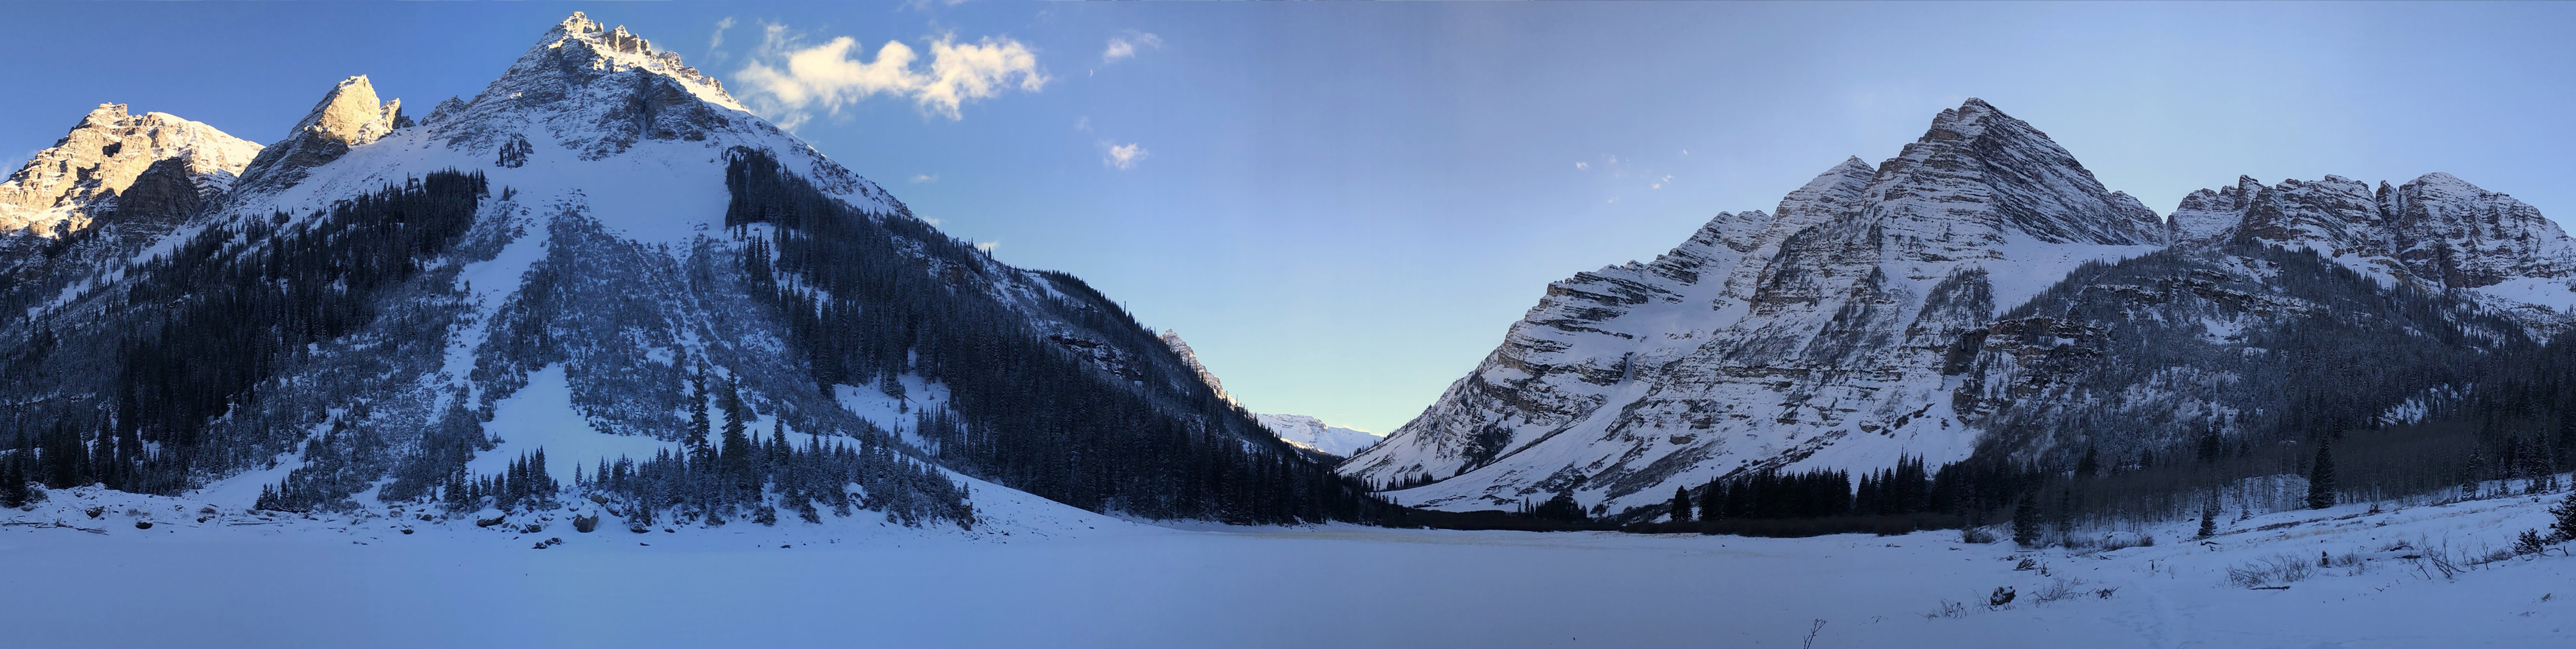 Early spring snows cover Crater Lake at the base of Maroon Bells in Aspen, Colorado